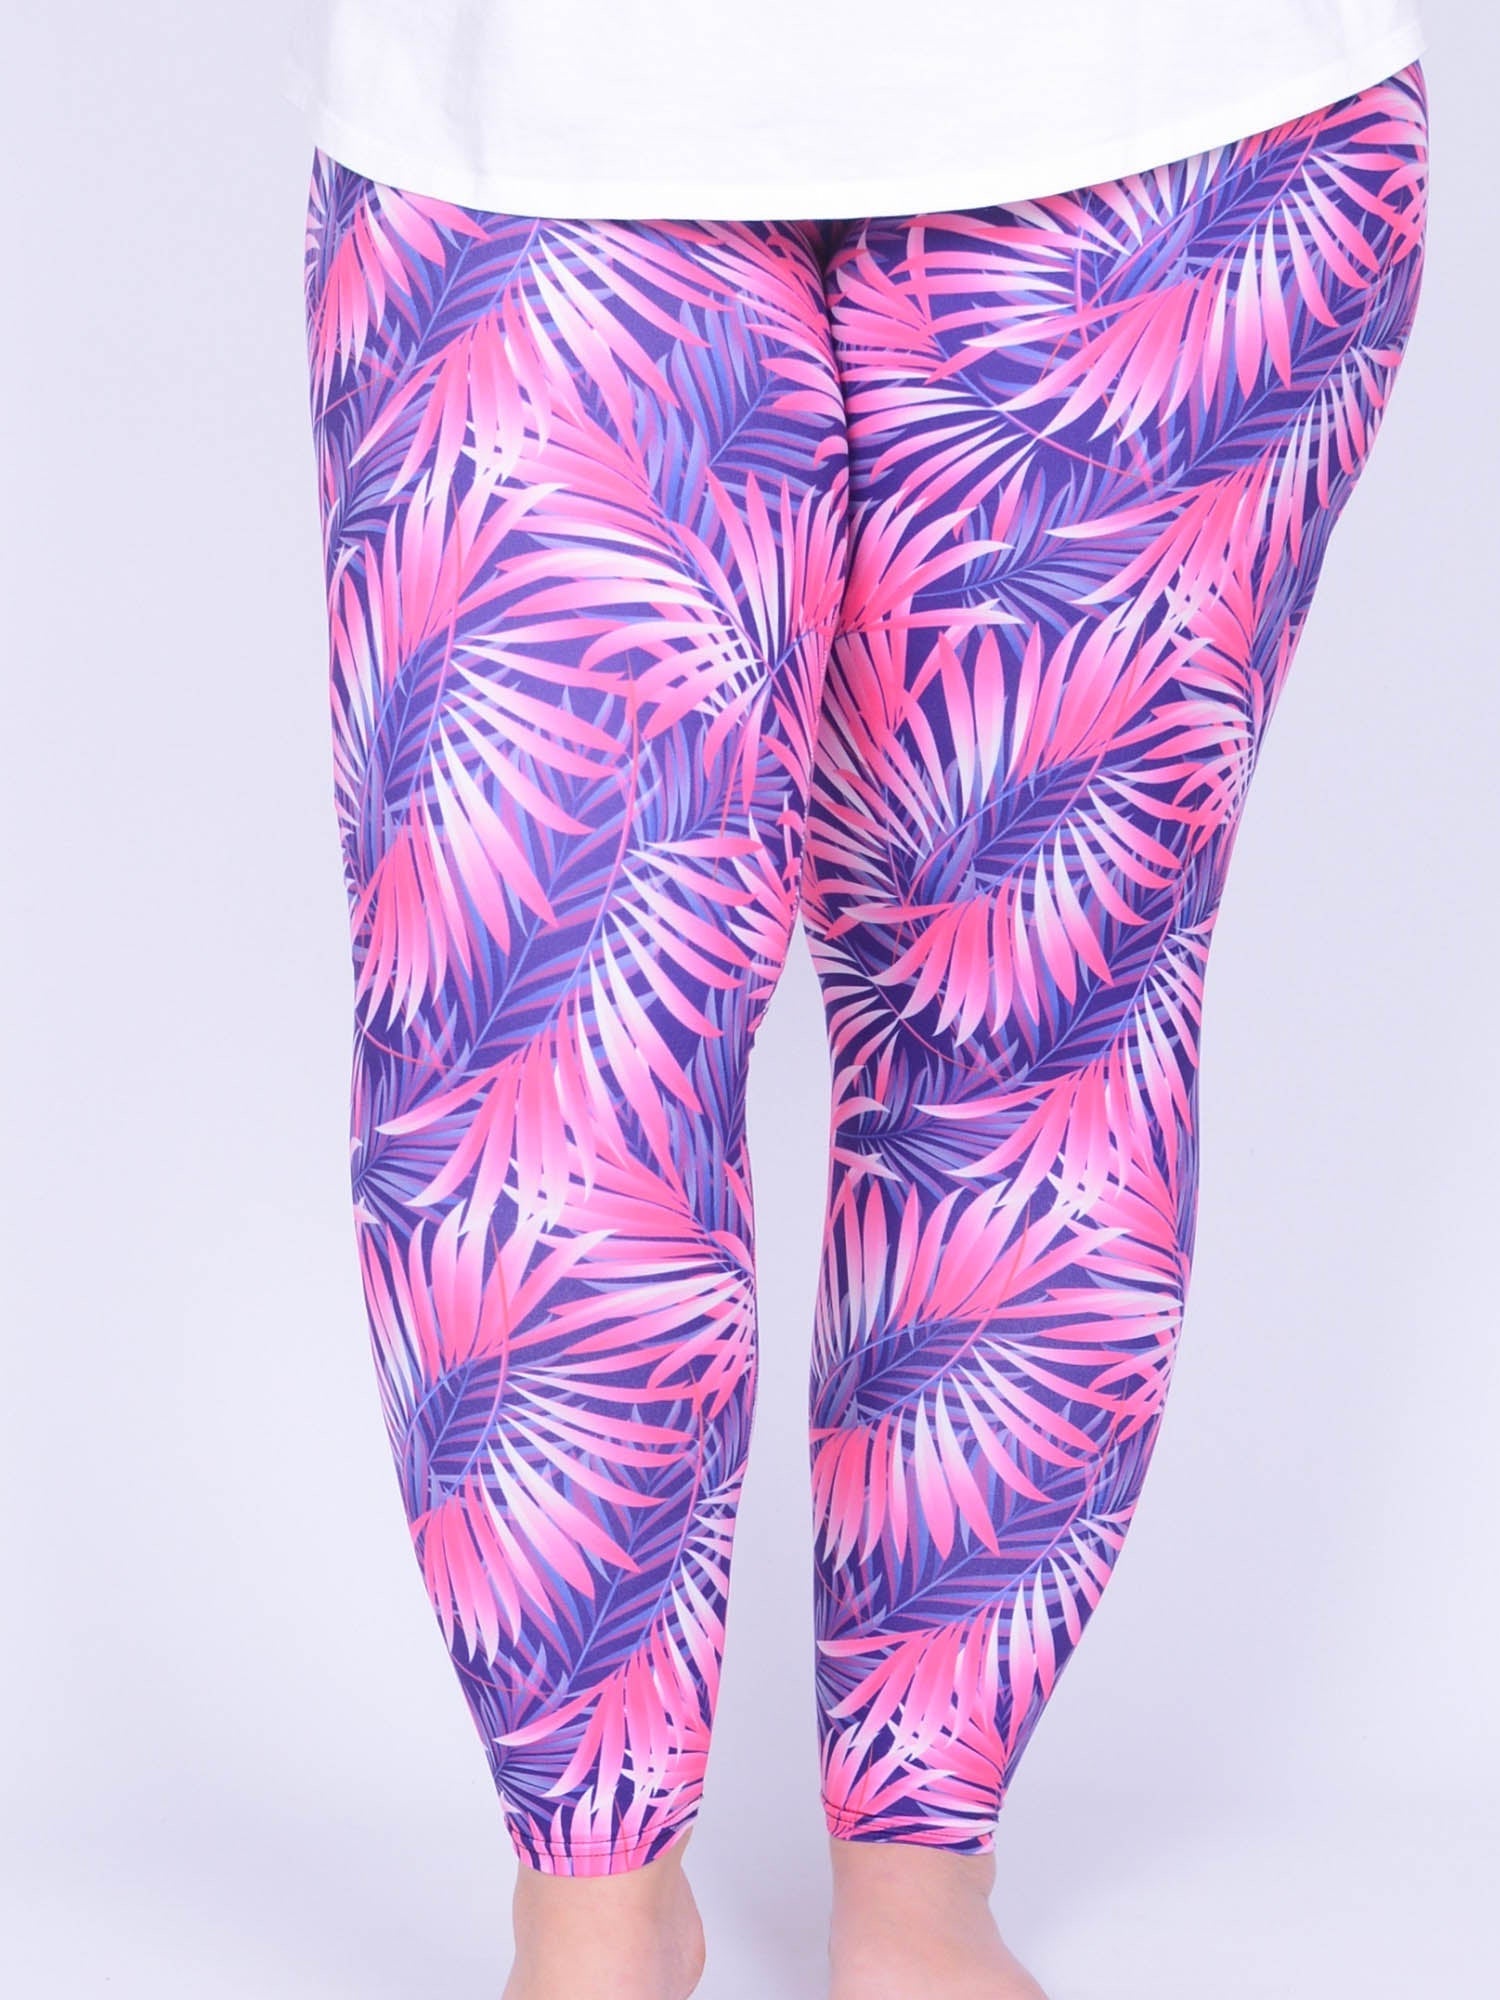 Leggings - Tropical Leaves Pink - L3, Trousers, Pure Plus Clothing, Lagenlook Clothing, Plus Size Fashion, Over 50 Fashion